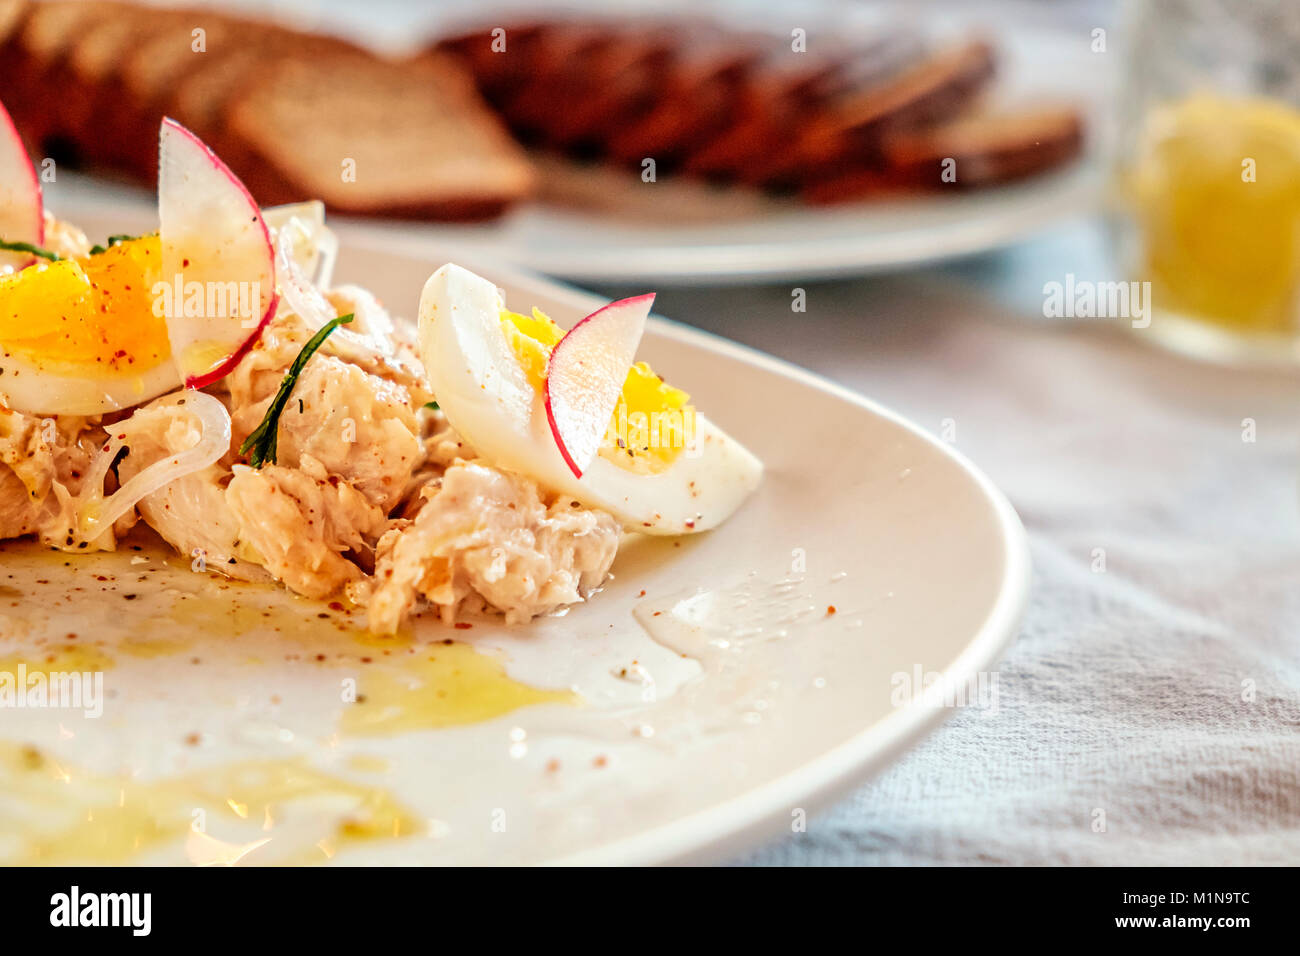 Arctic Char pate with hard-boiled eggs, dill, radishes and rye bread Stock Photo